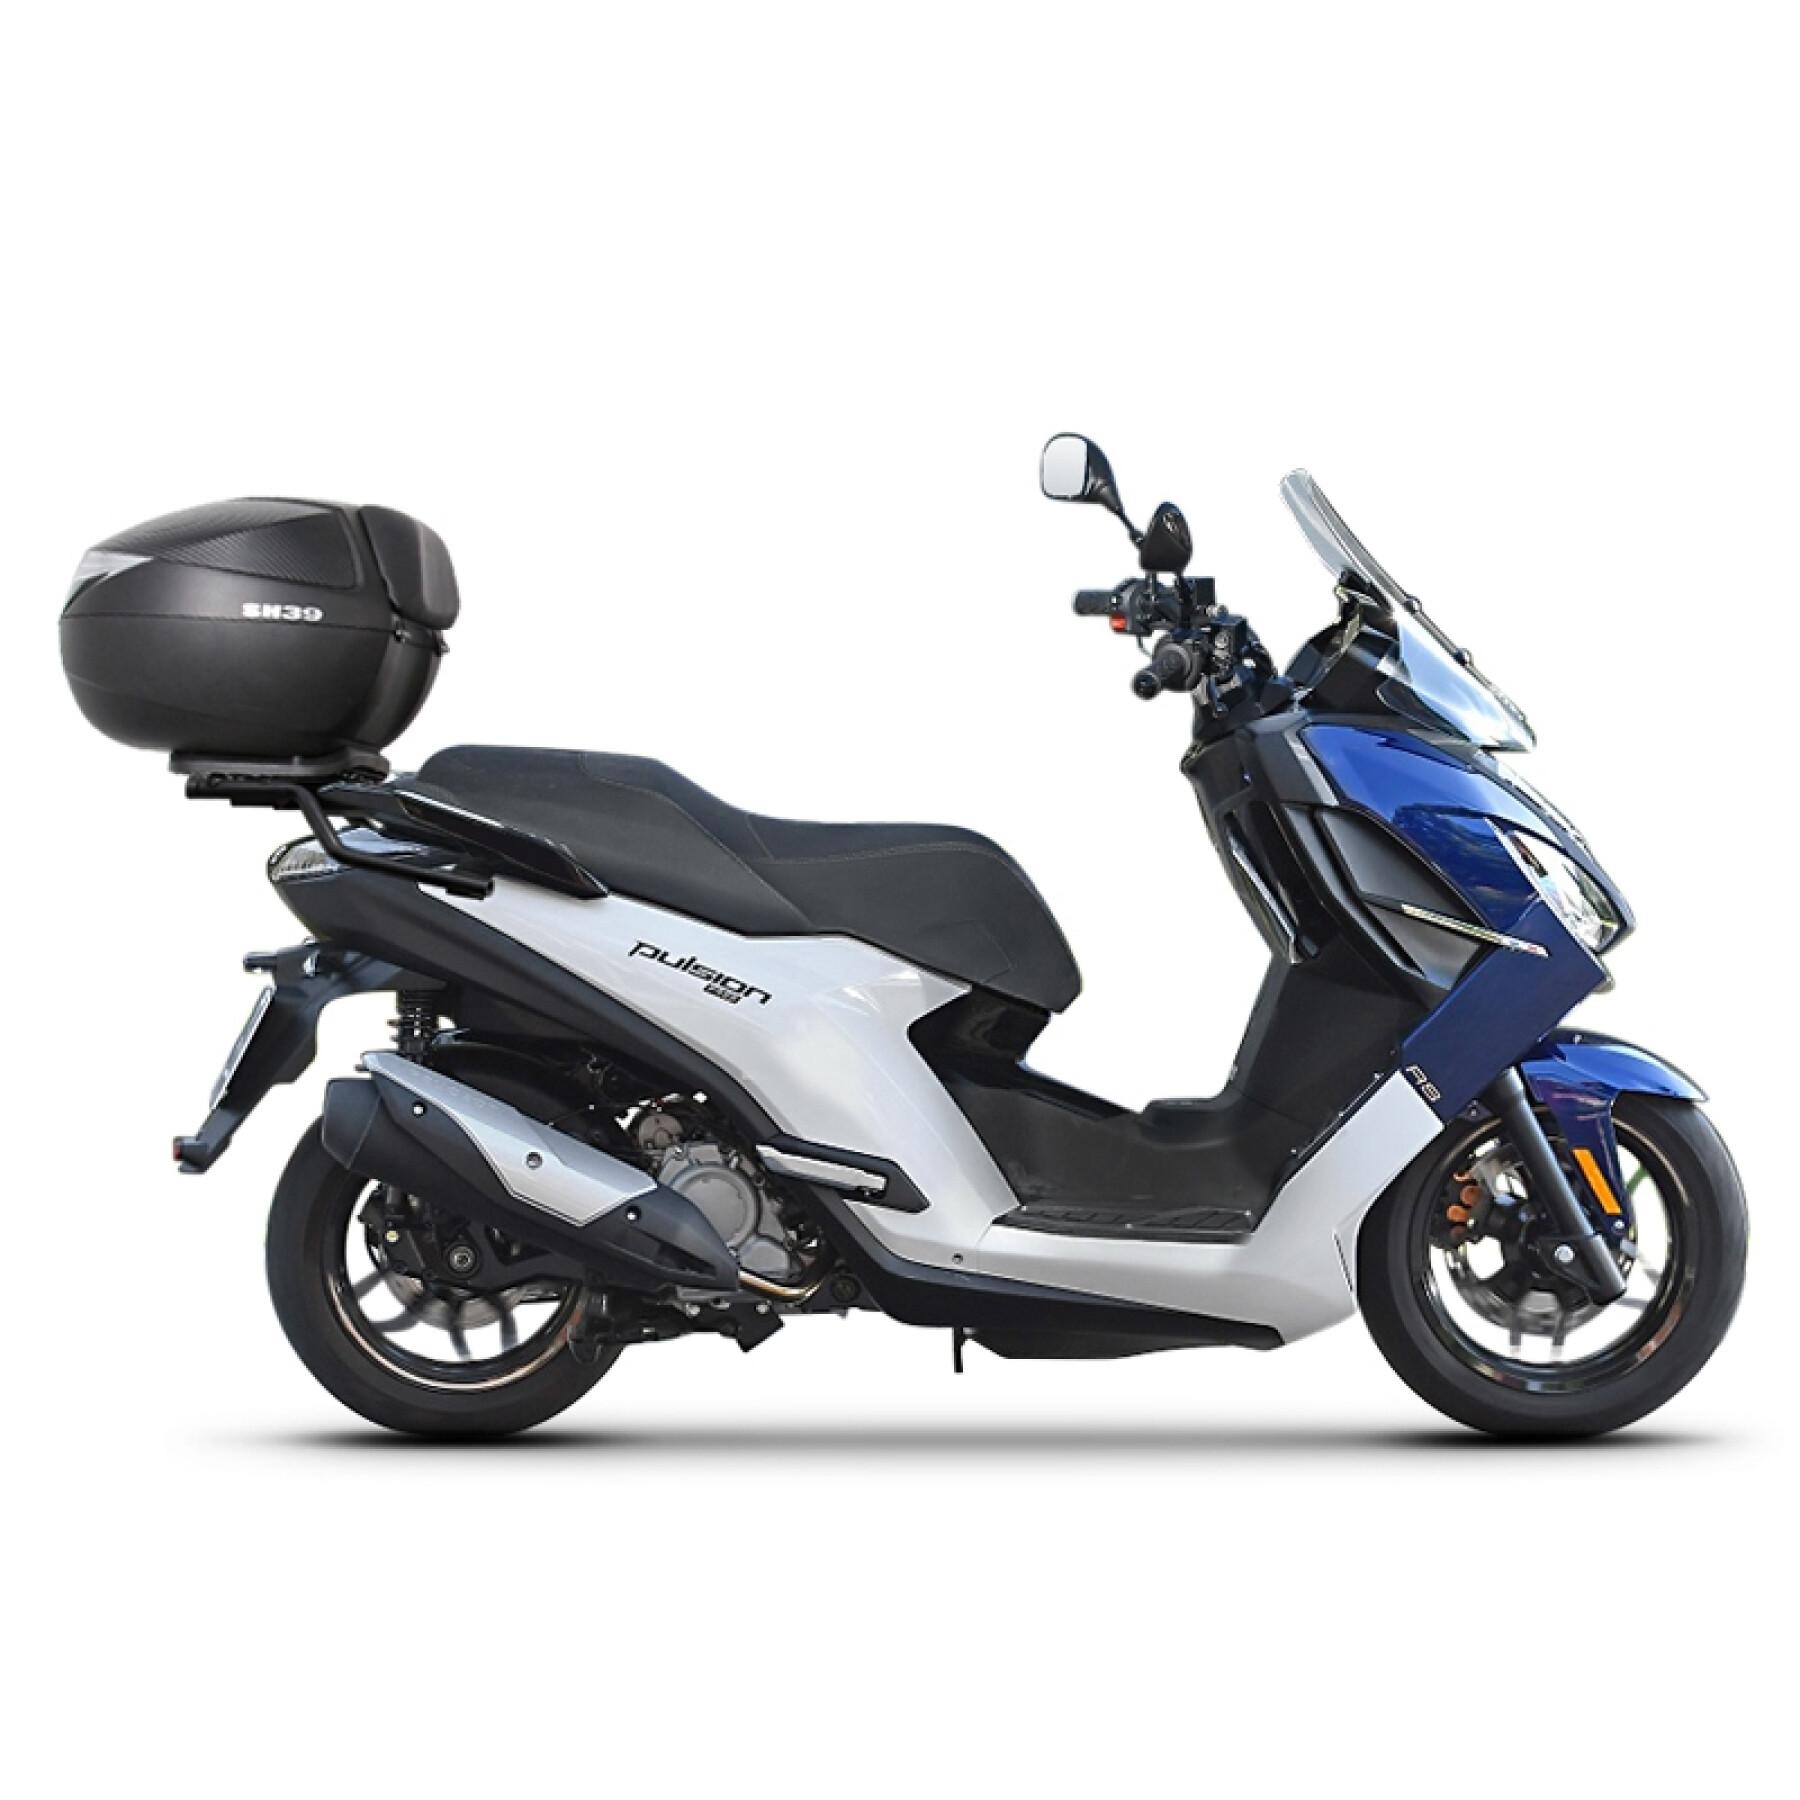 Ondersteuning topkoffer scooter shadpeugeot pulsion 125 2018-2021